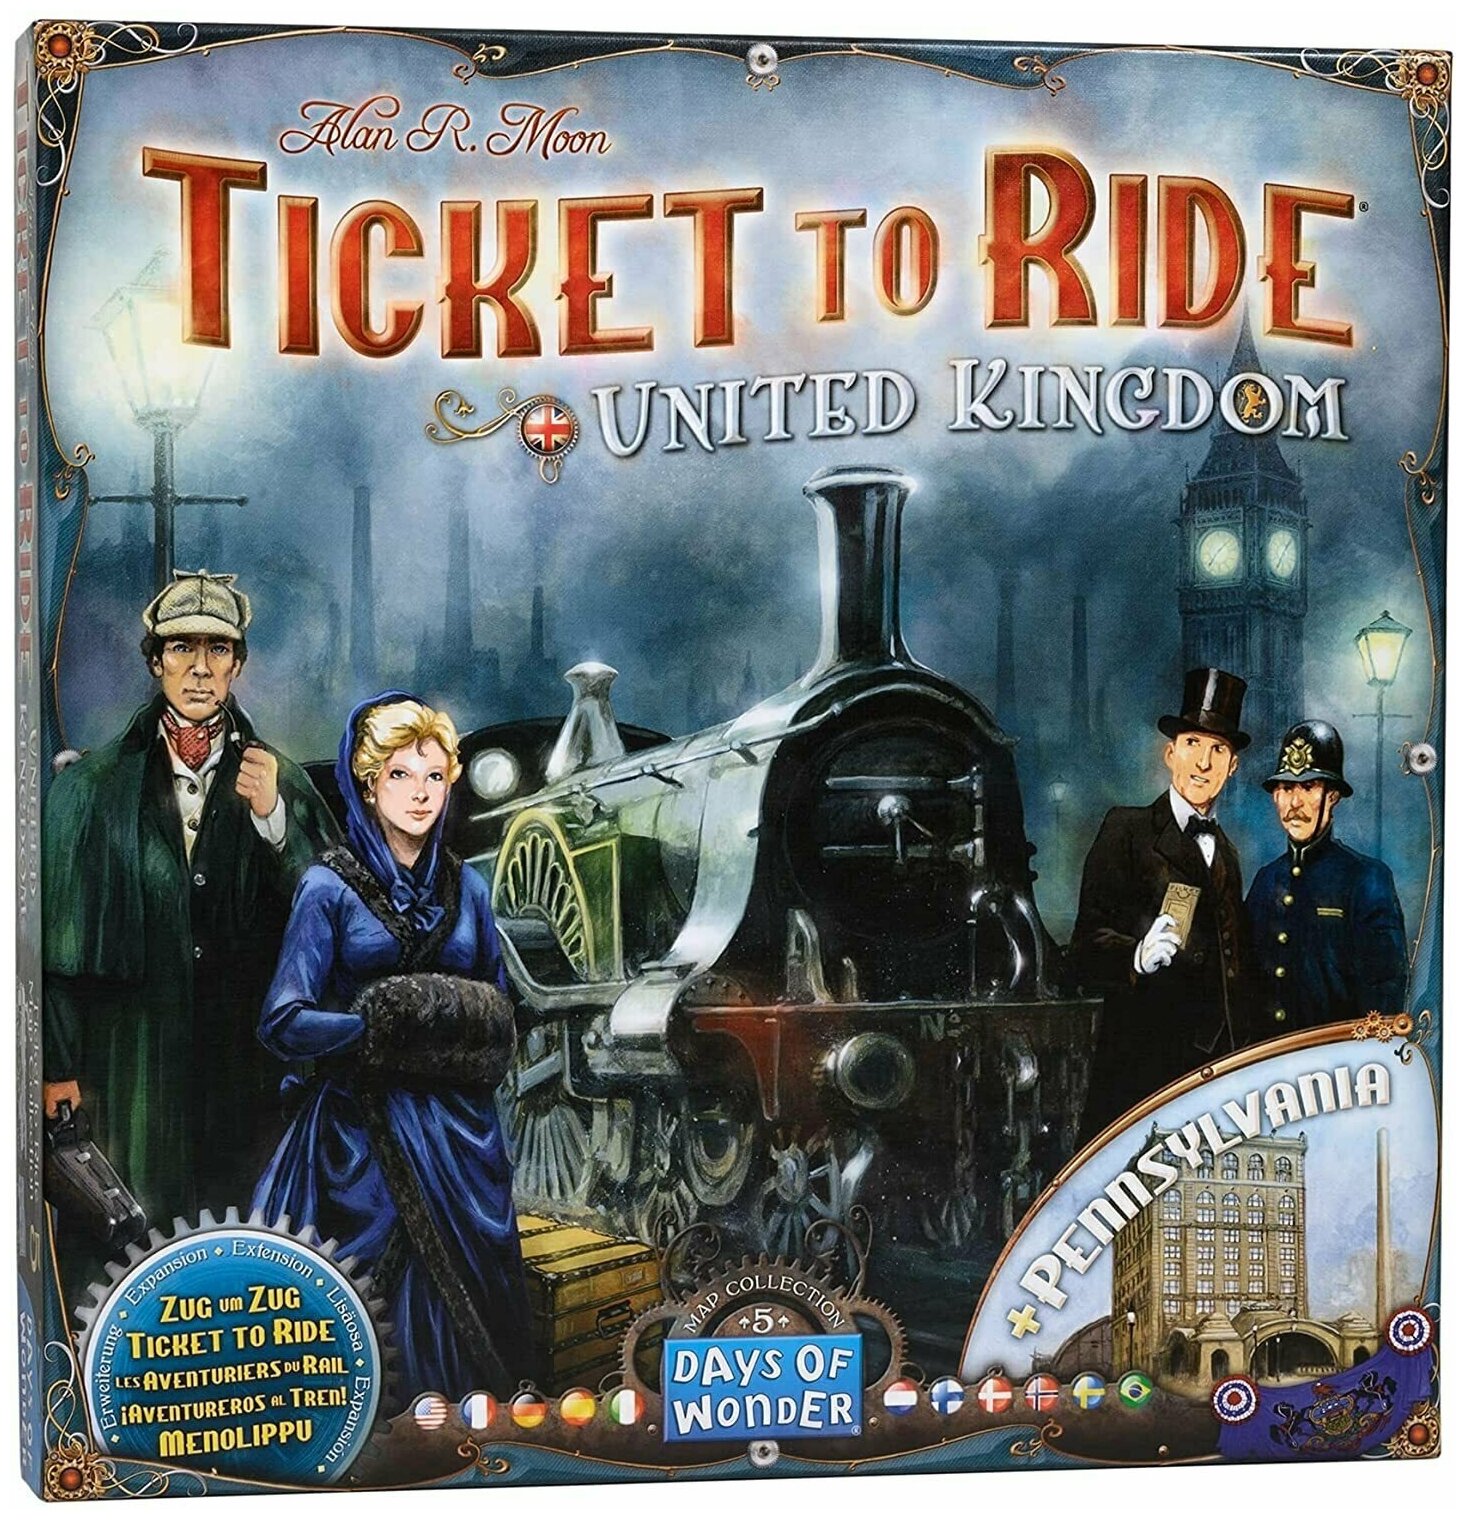 Ticket to ride steam фото 44